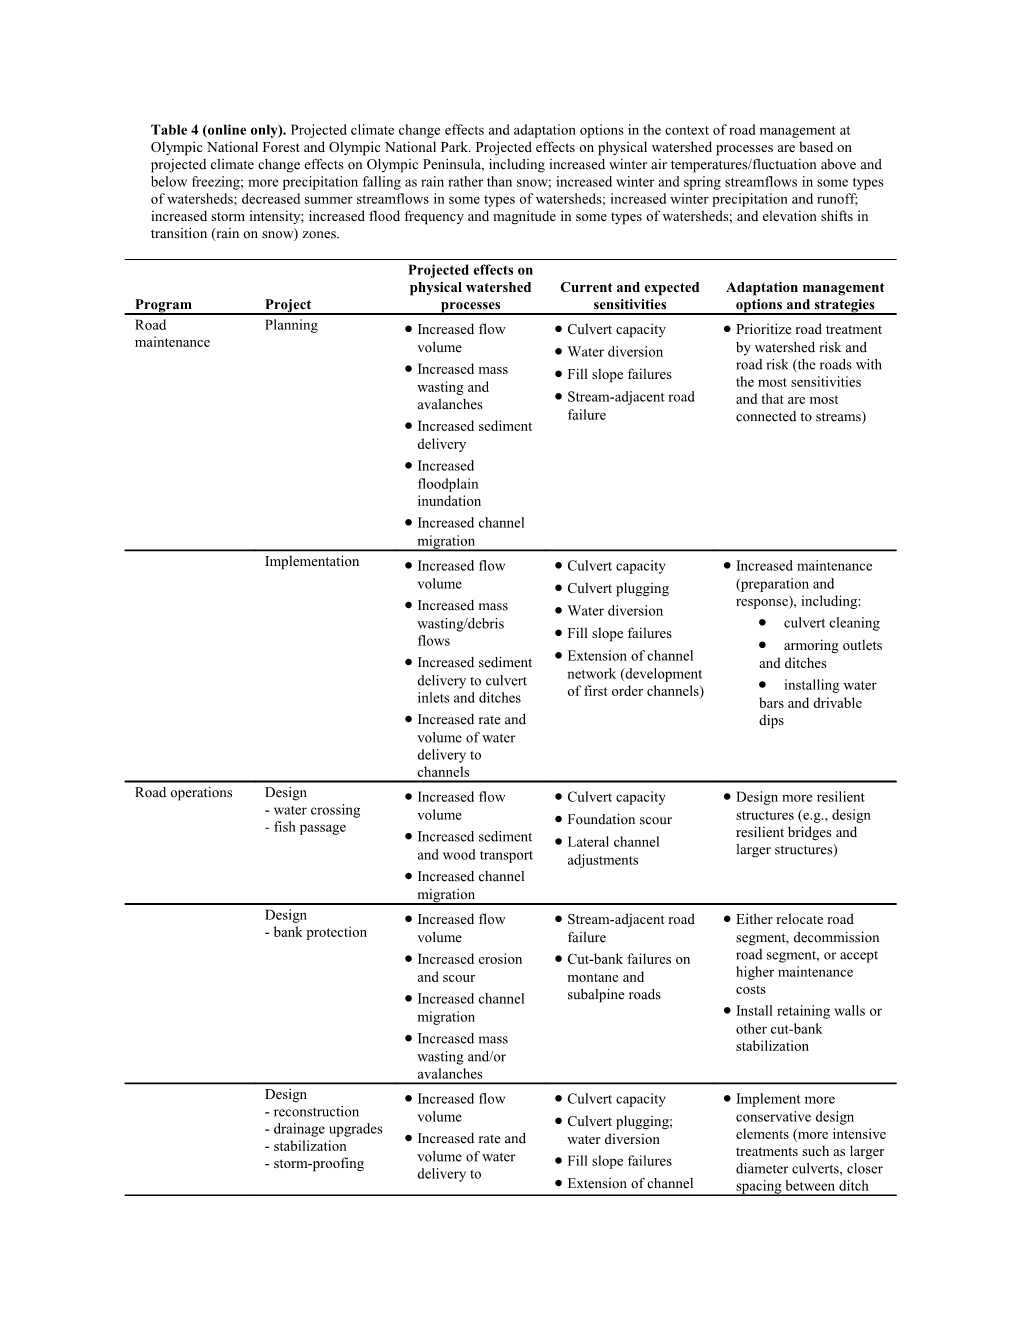 Table 4 (Online Only). Projected Climate Change Effects and Adaptation Options in The